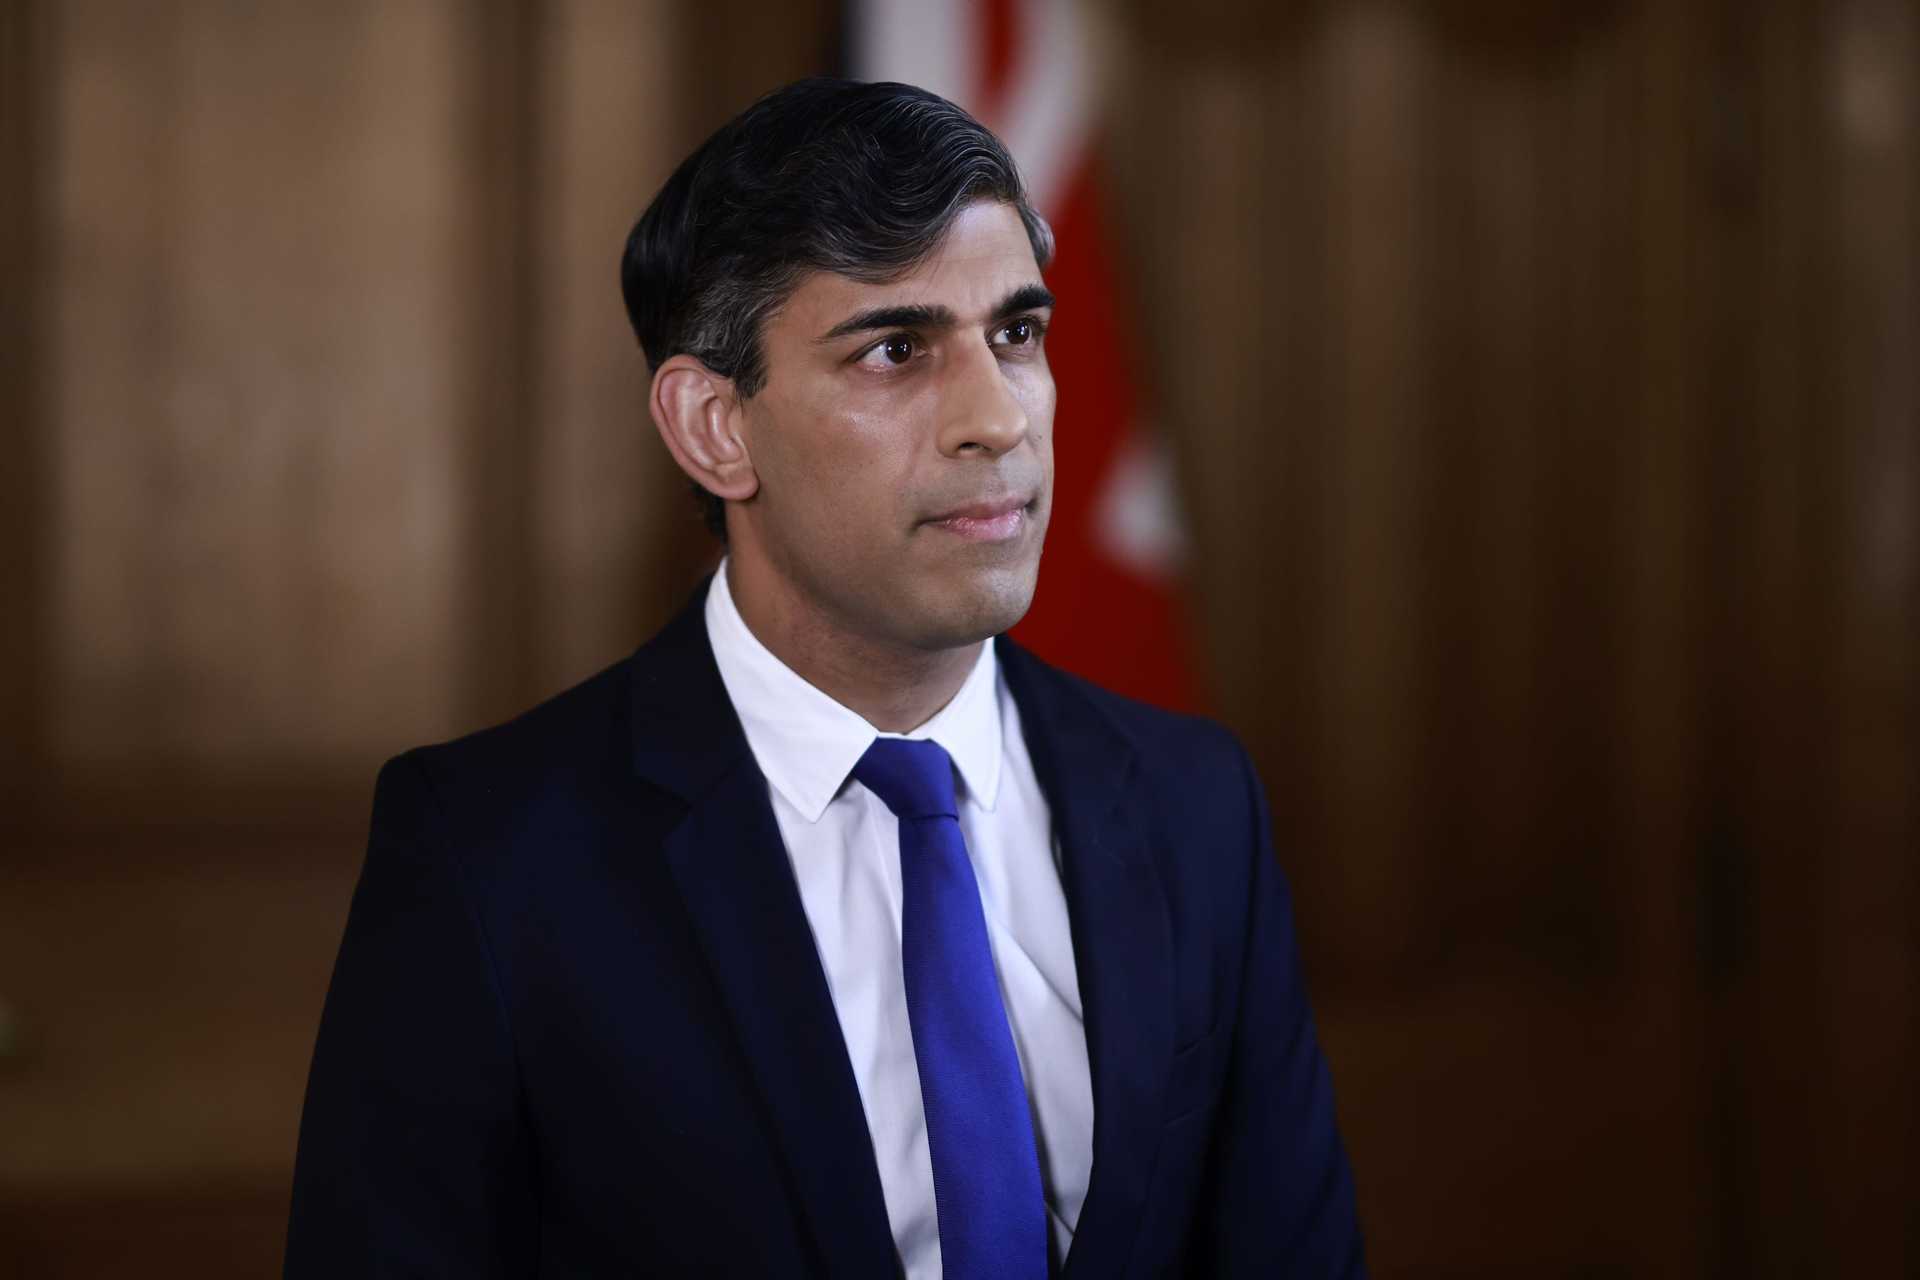 Rishi Sunak’s Government is ‘finished’ the First Minister said.